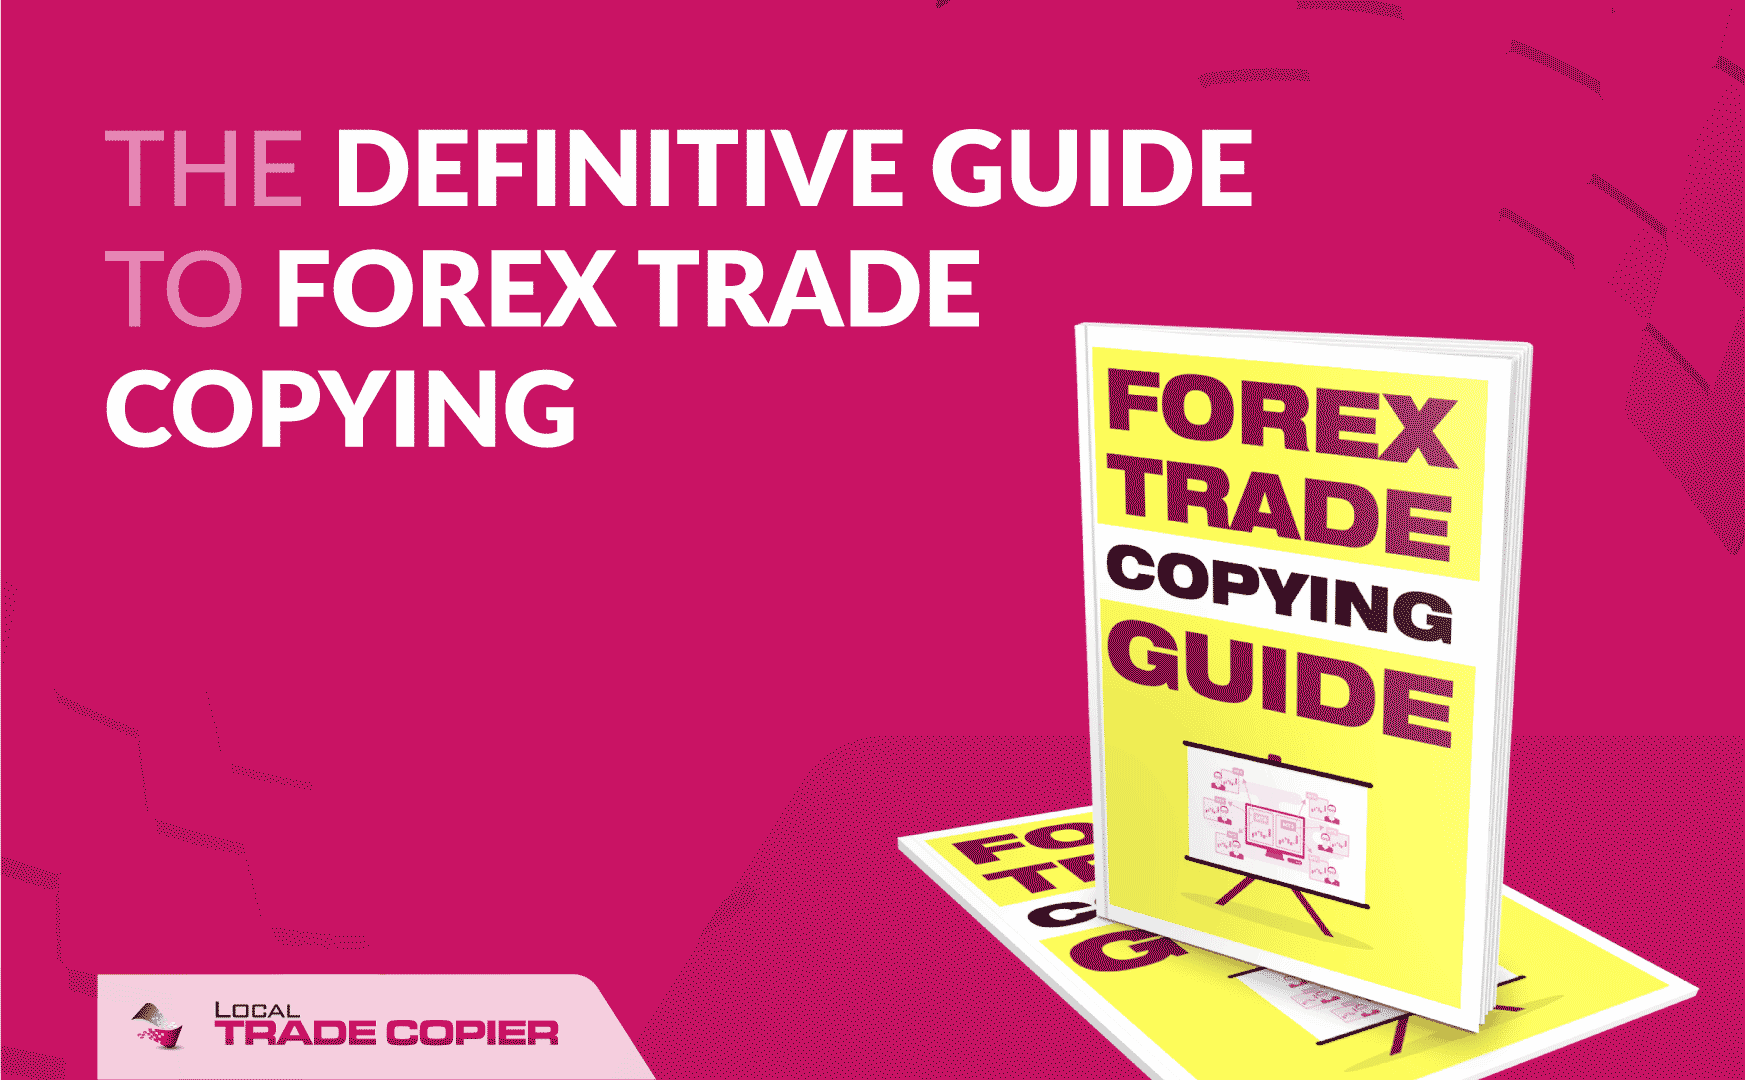 Local-Trade-Copier-Tutorials-introducing-the-definitive-guide-to-trade-copying-1745x1080